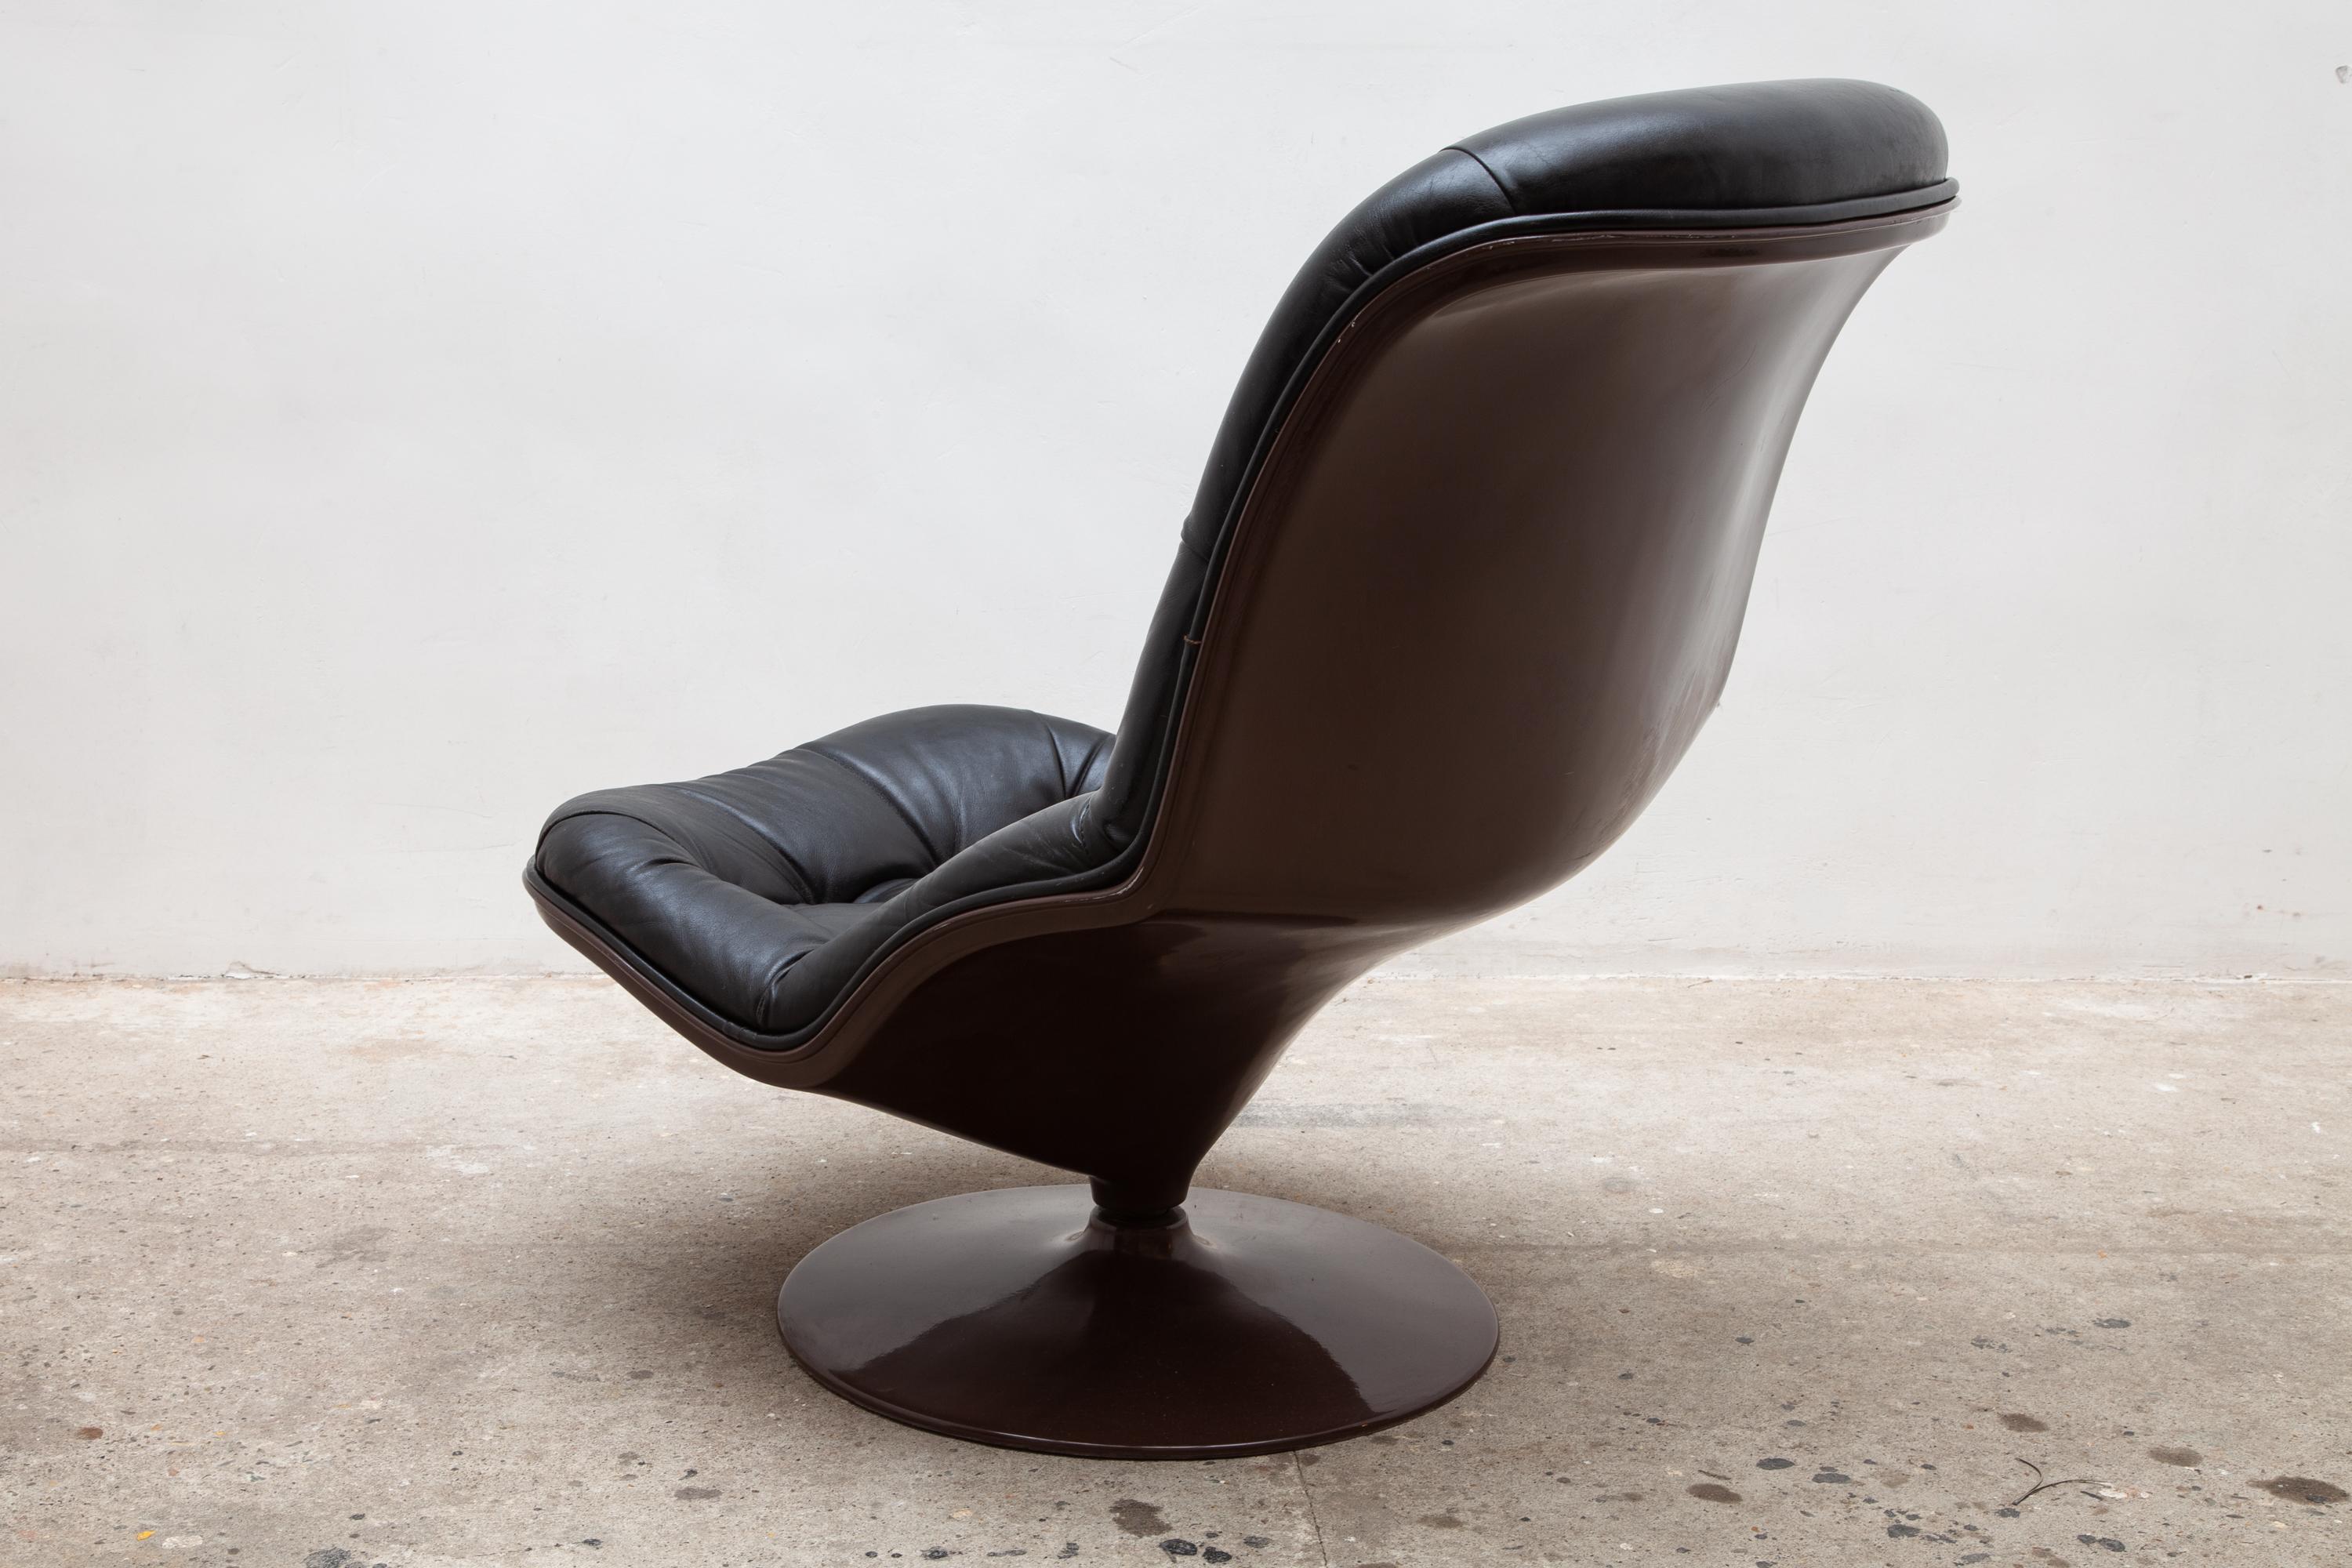 Stylish 1970s lounge seat was produced by Beaufort in Belgium. Tufted black leather on a chocolate brown fiberglass base. It has a swivel and tilt function. The chair is in pristine condition. Dimension: 70 W x 80 H x 70 D cm.
 